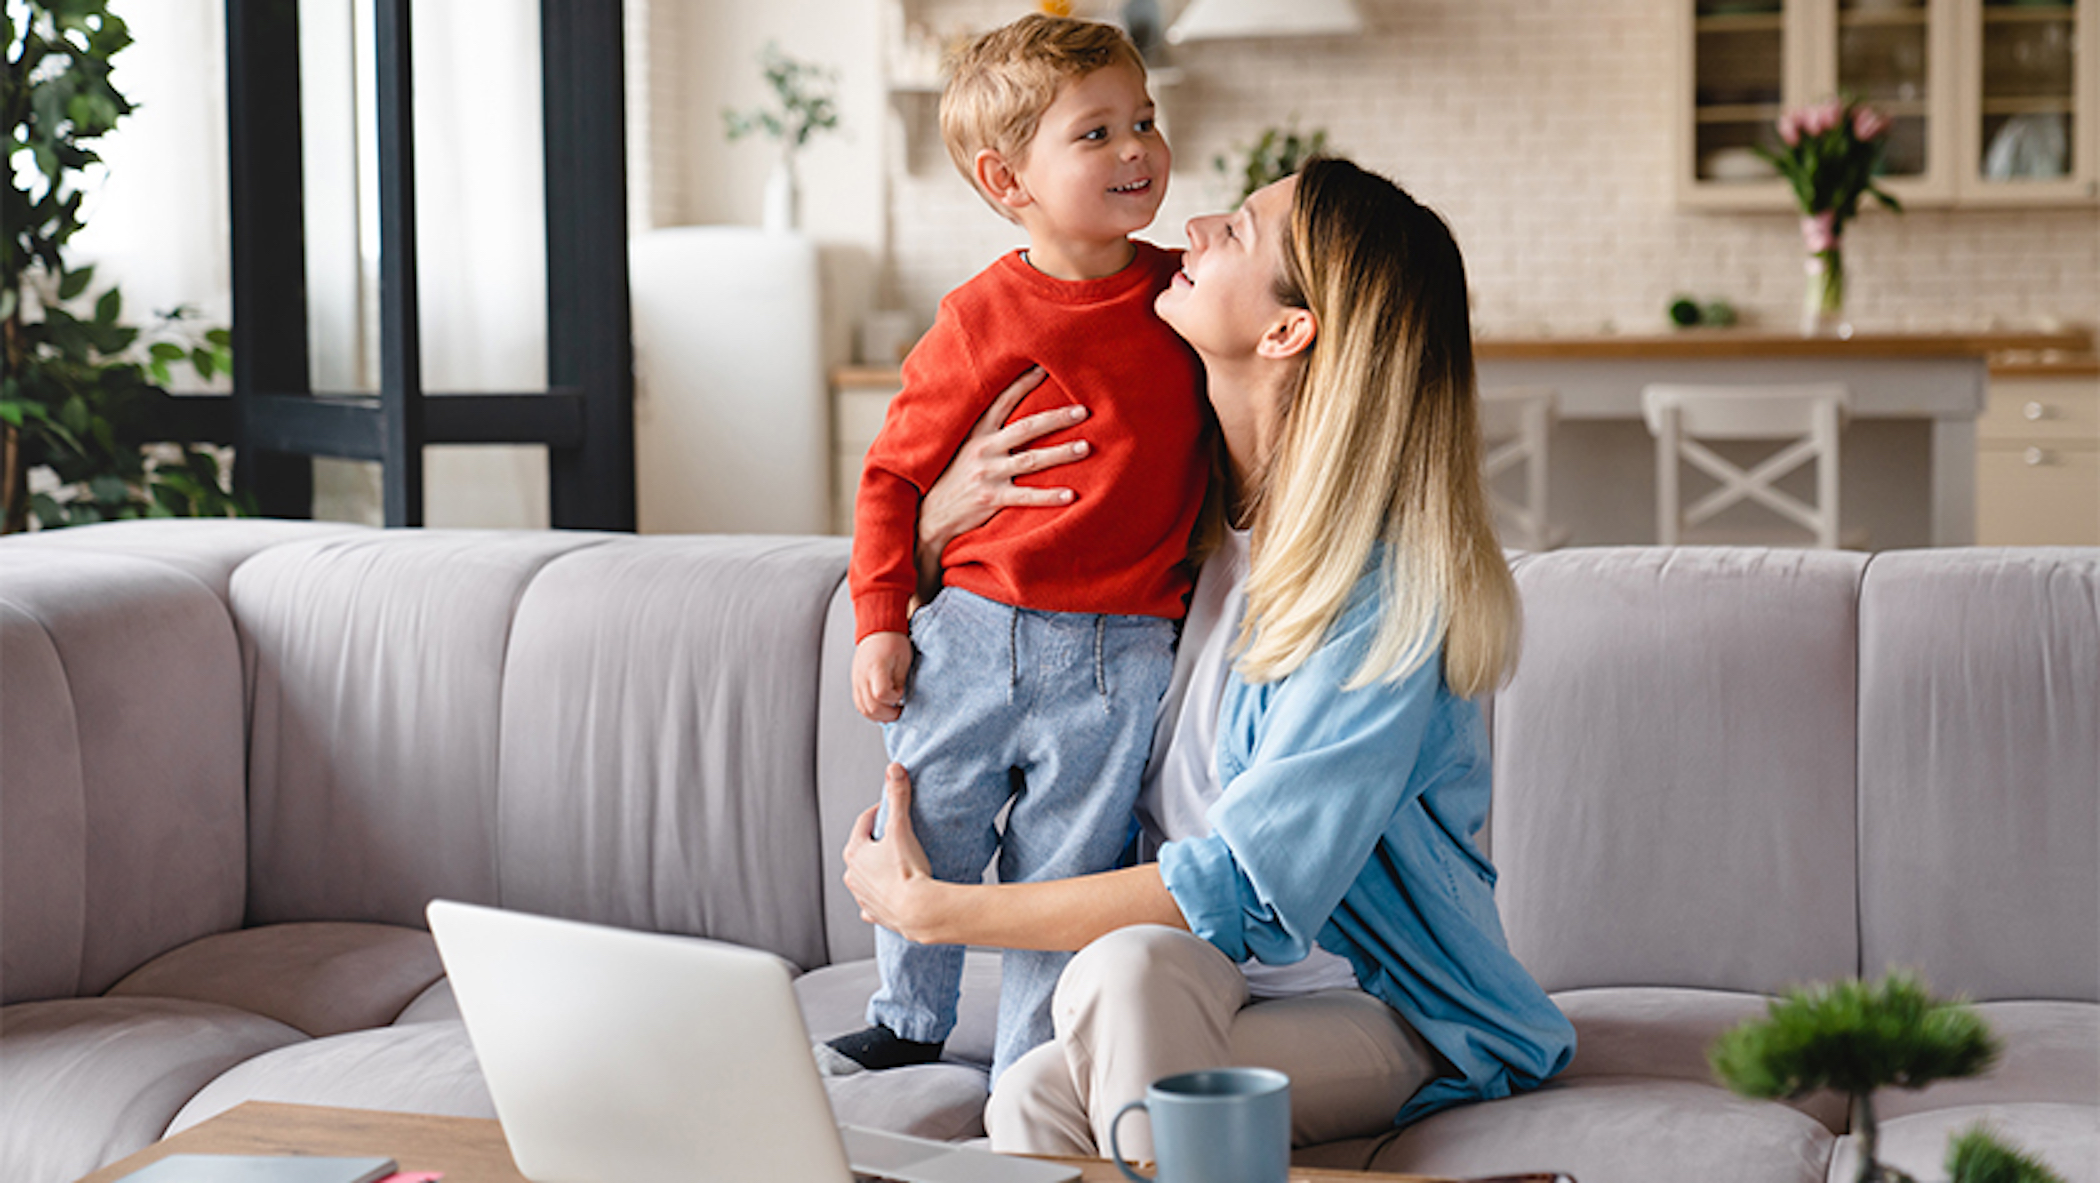 A toddler stands on a couch as his mother wraps her arms around his legs. In the event of the parent’s death or incapacity, a guardian can be appointed in the living trust to ensure the well-being of the child.